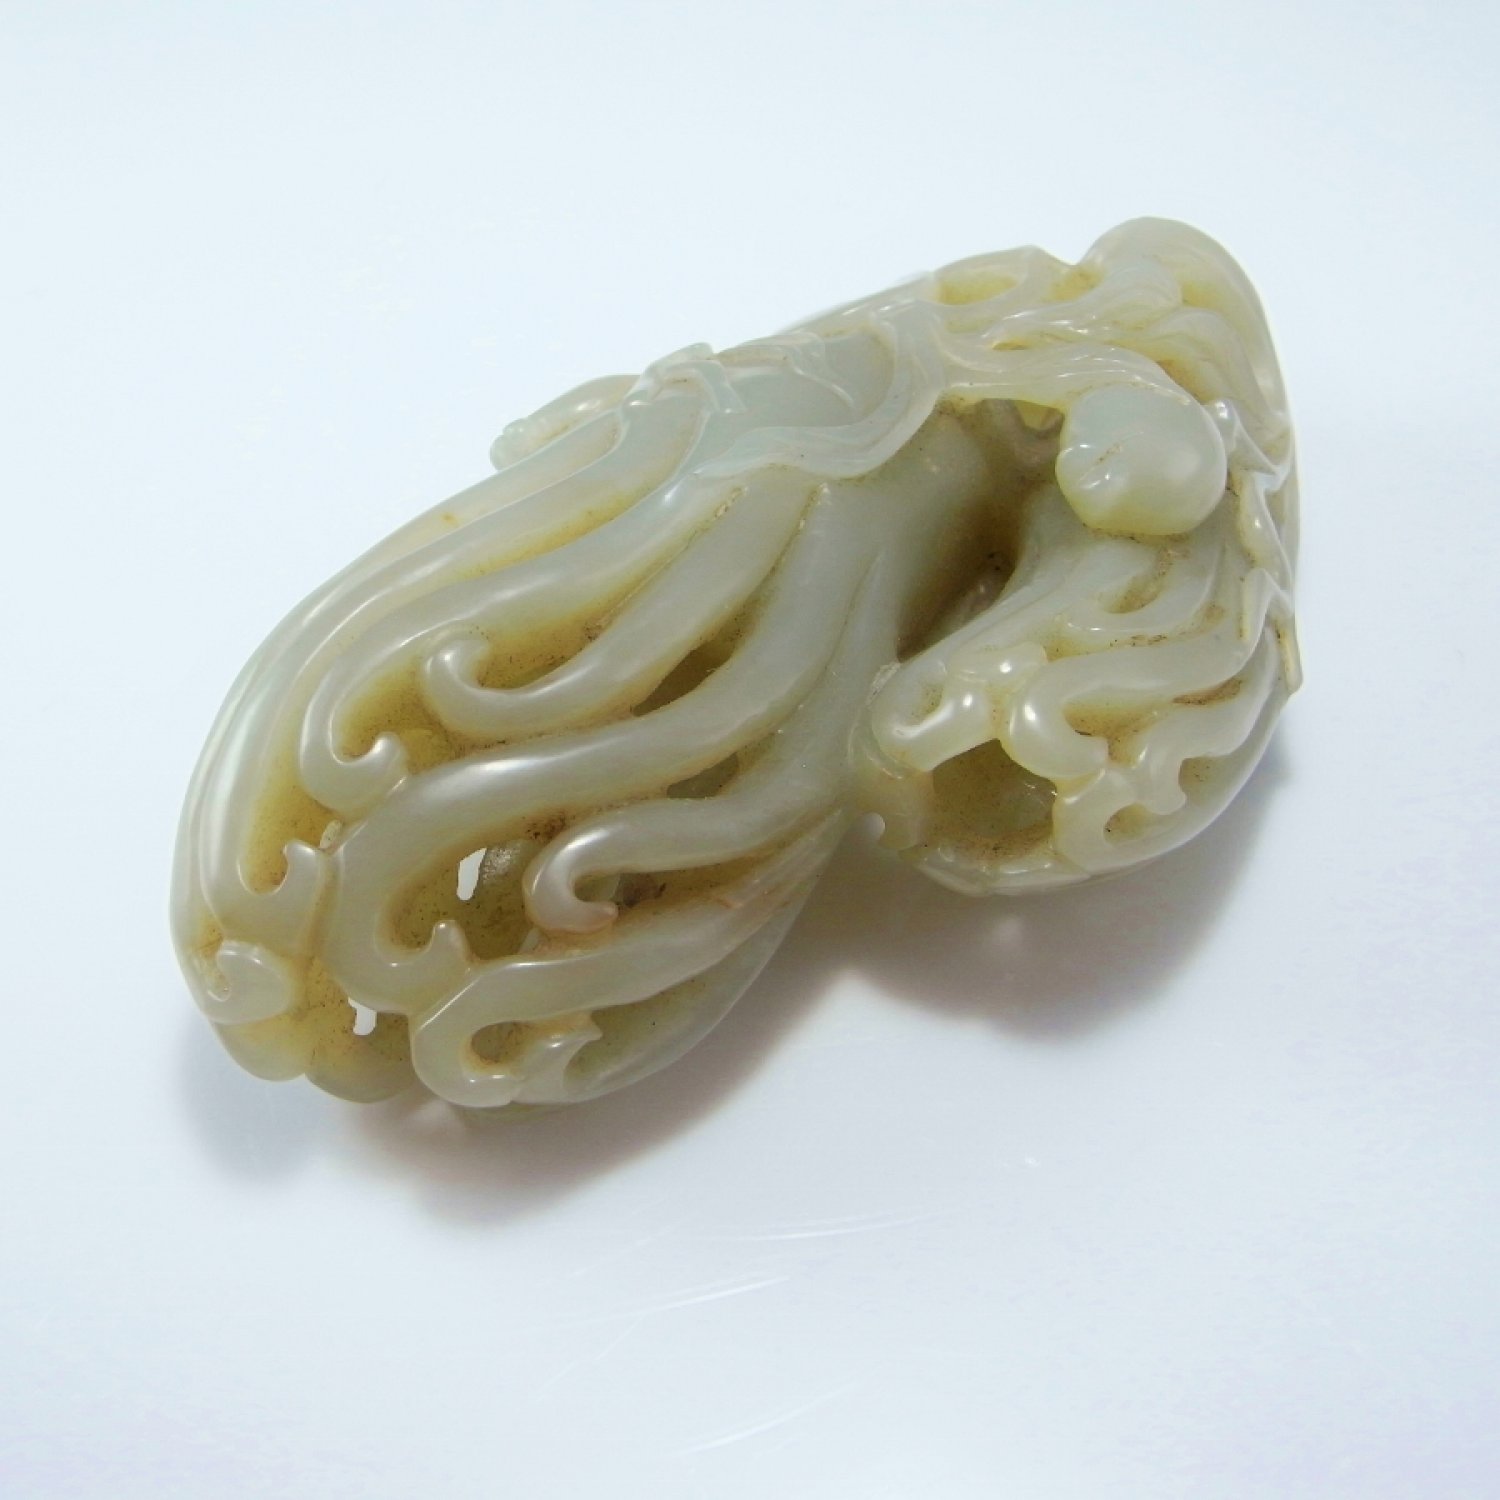 18th Century Jade Citron Lady Finger Citron Buddhas Hand Nephrite Jade Carving Statue Antique Chinese Celadon Jade Qing Dynasty Qianlong Statue Ornament Sculpture Decoration